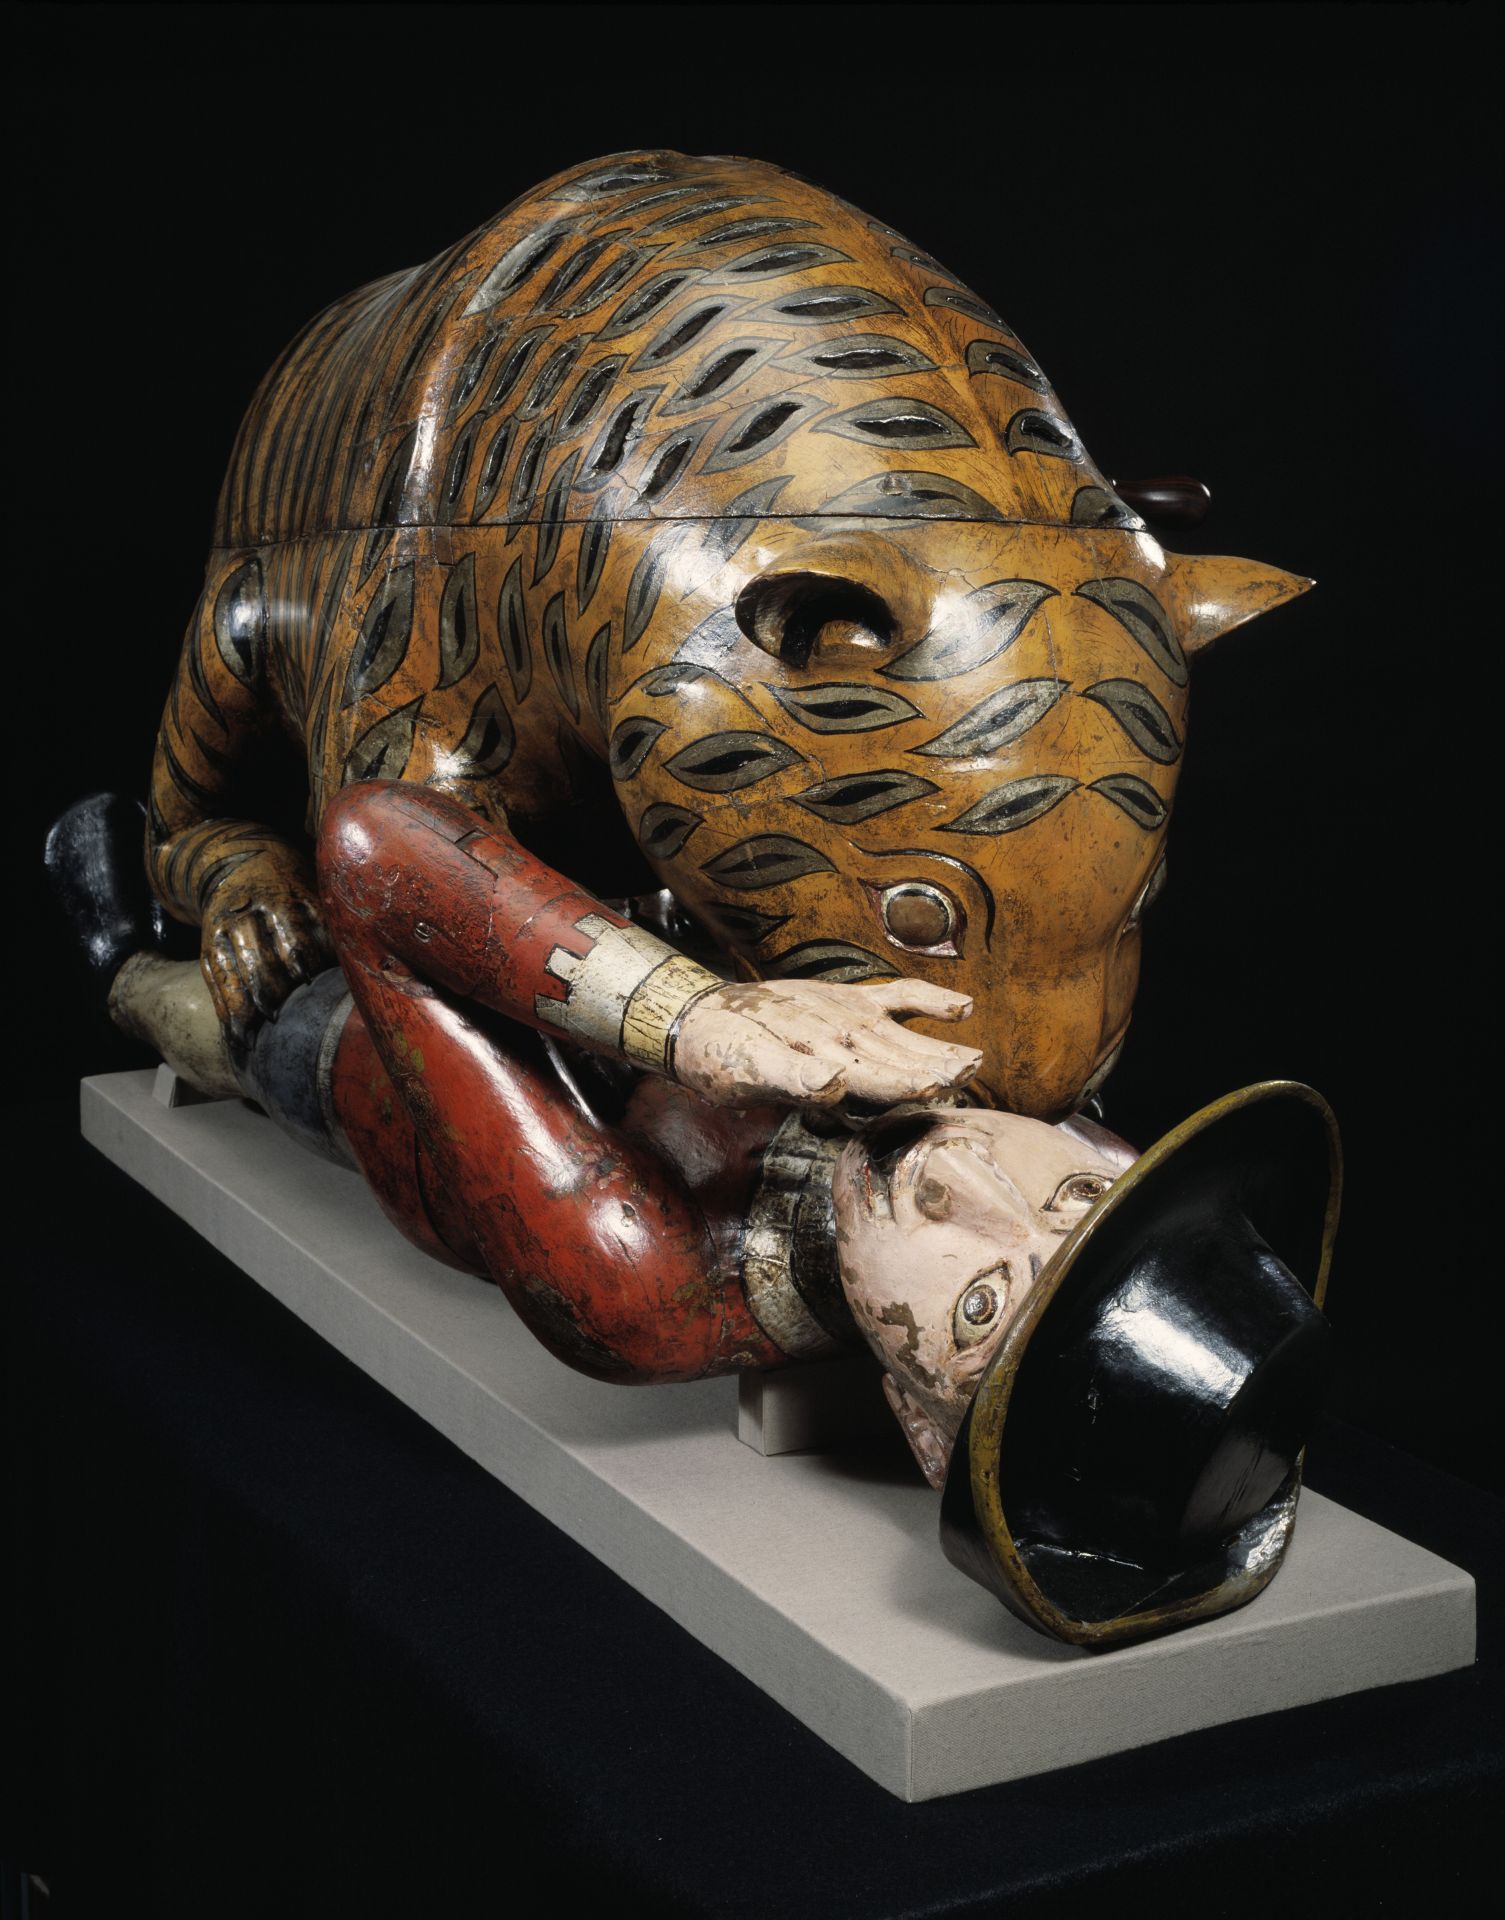 Victoria & Albert Museum - 'Tipu's Tiger', a carved and lacquered wooden semi-automaton in the shape of a tiger mauling a man, Mysore, India, about 1793.